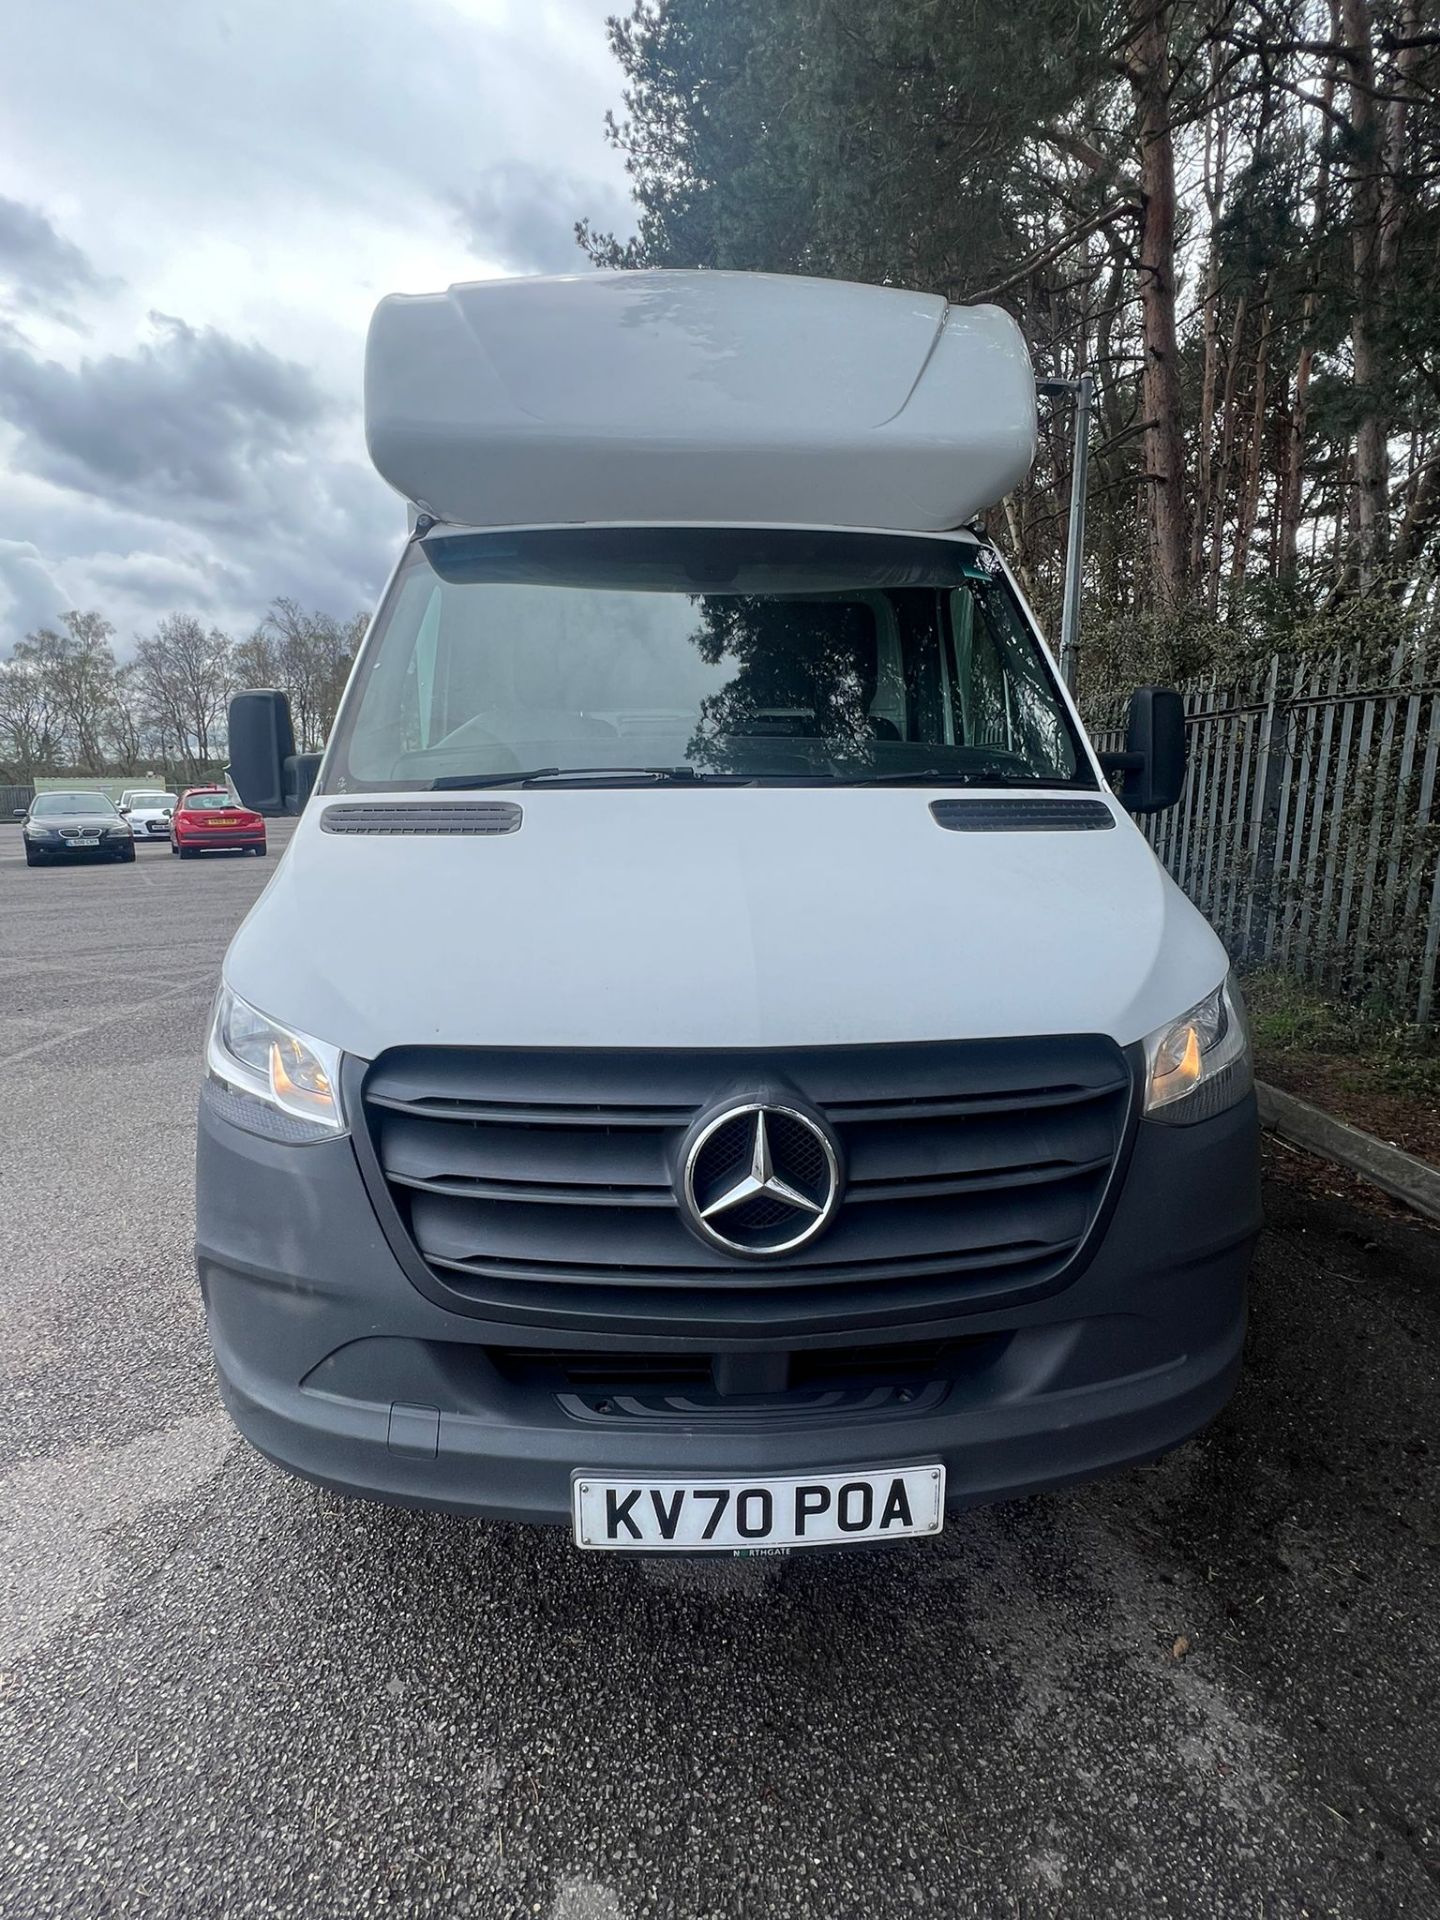 MERCEDES SPRINTER LUTON BOX VAN - FULLY SERVICED, READY FOR DUTY - Image 4 of 10